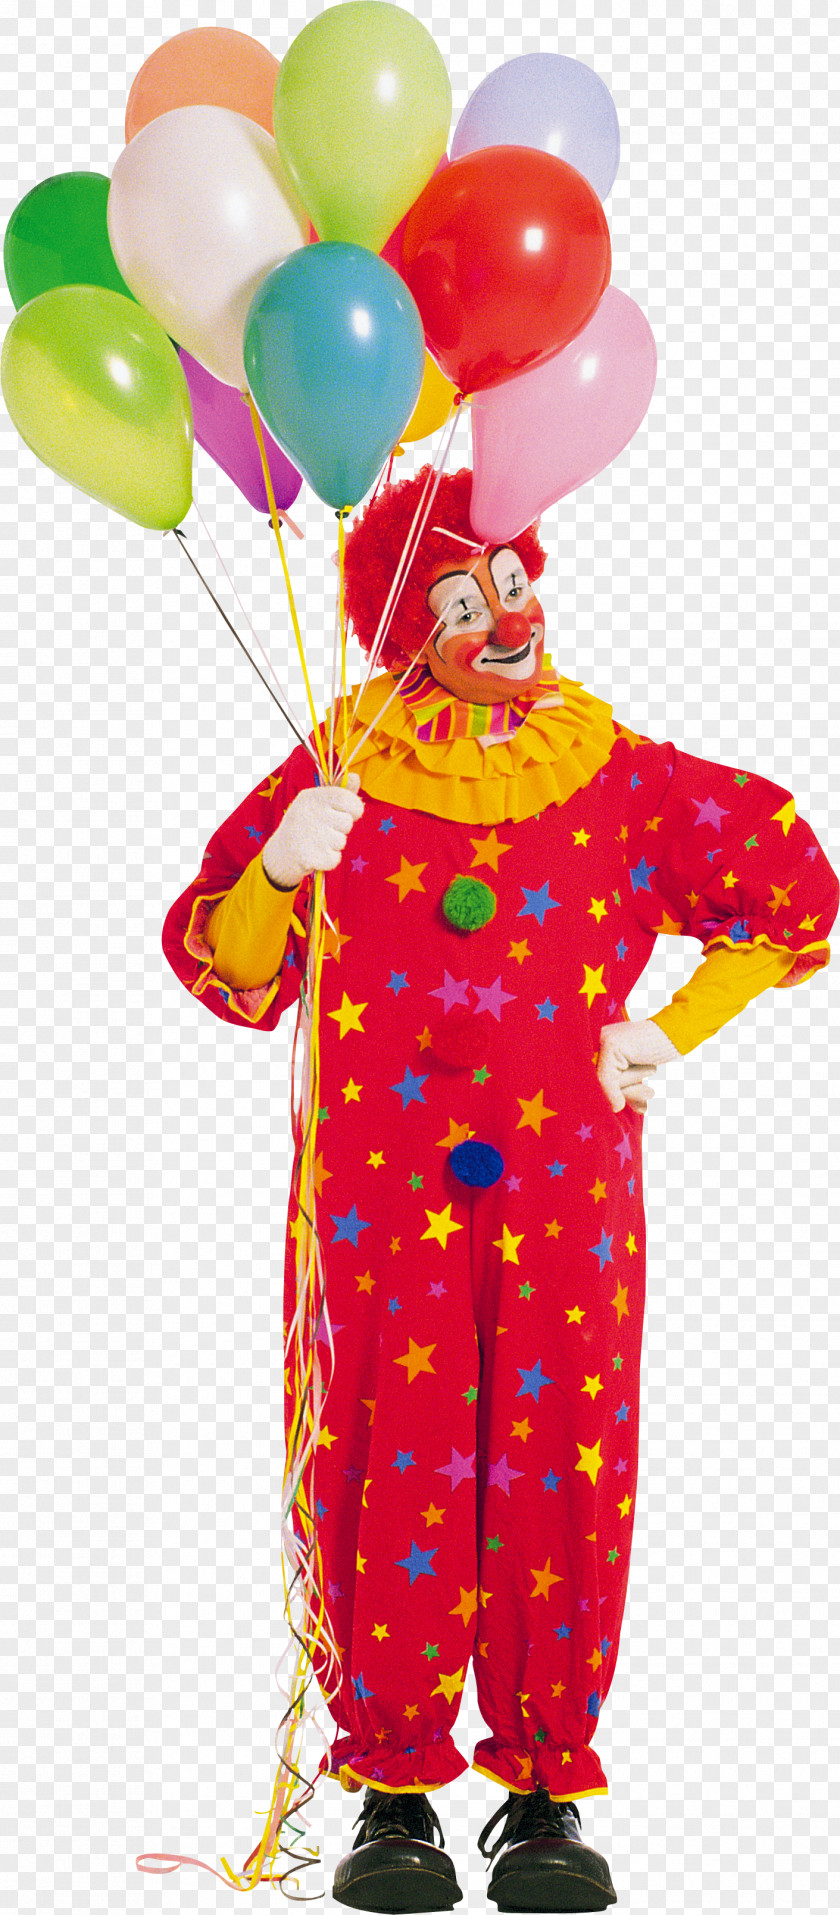 Clown Evil Stock Photography Getty Images PNG